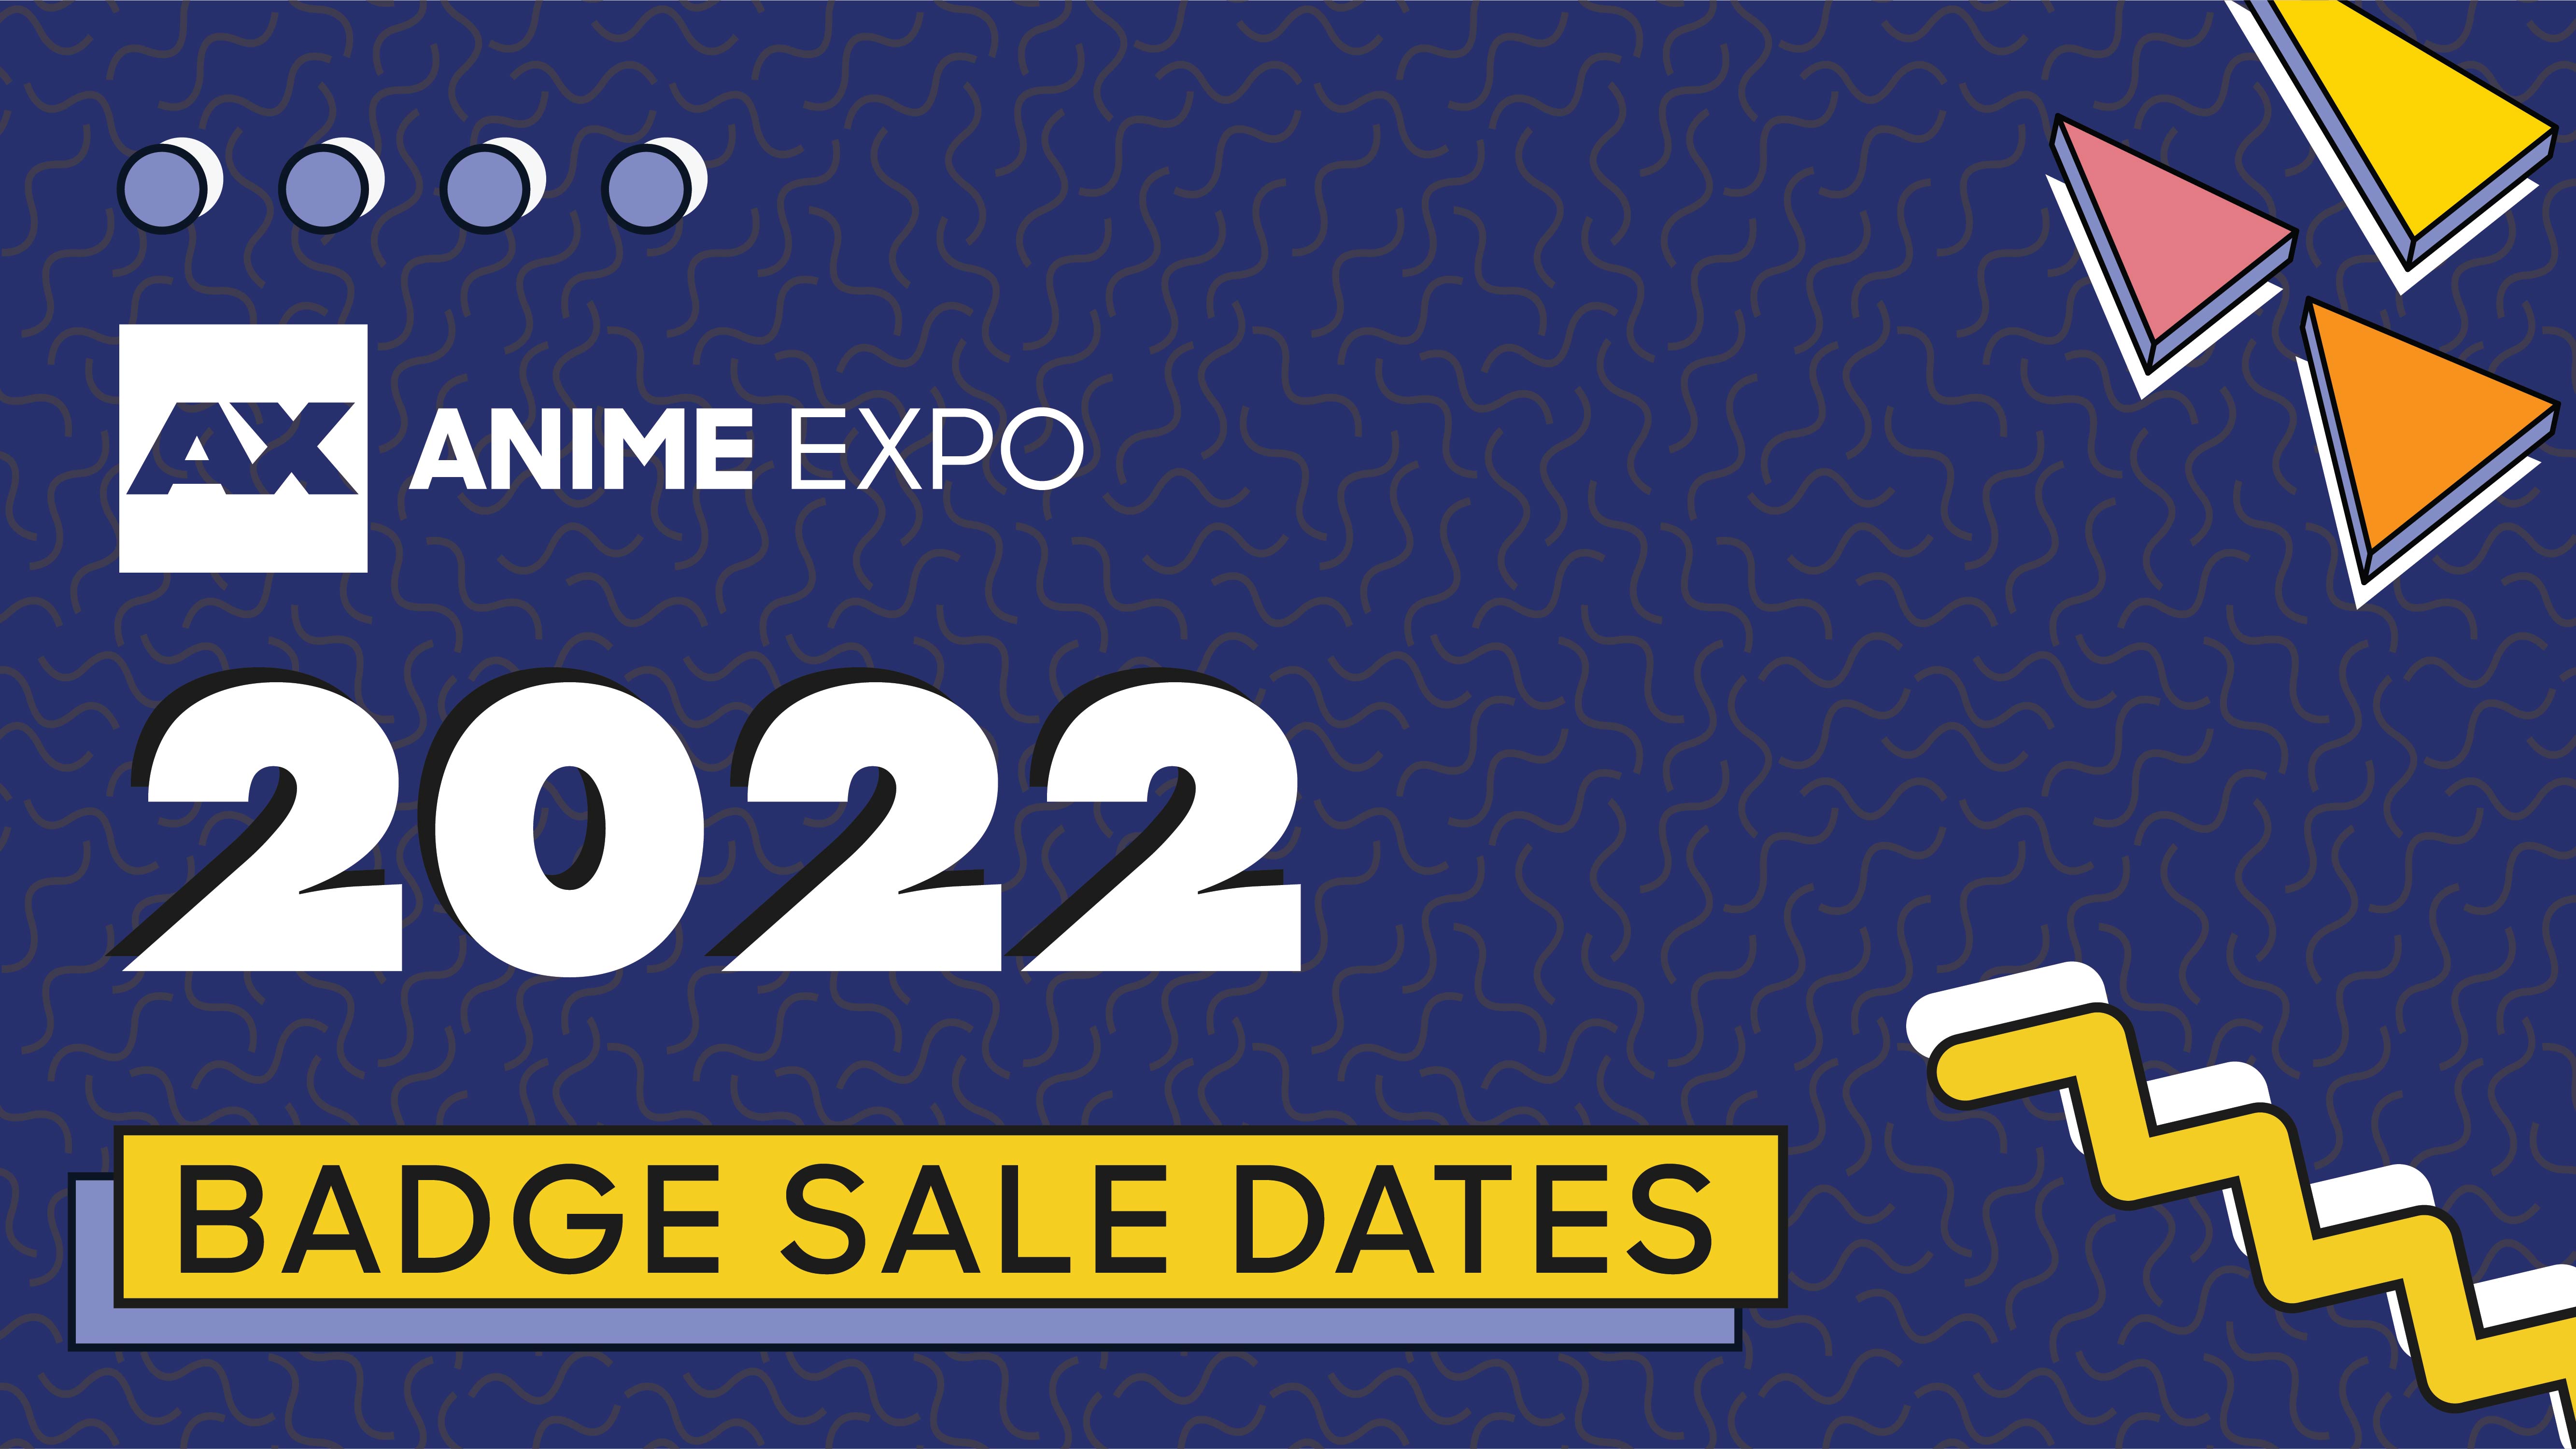 How to get Anime Expo 2023 tickets: Complete process explained